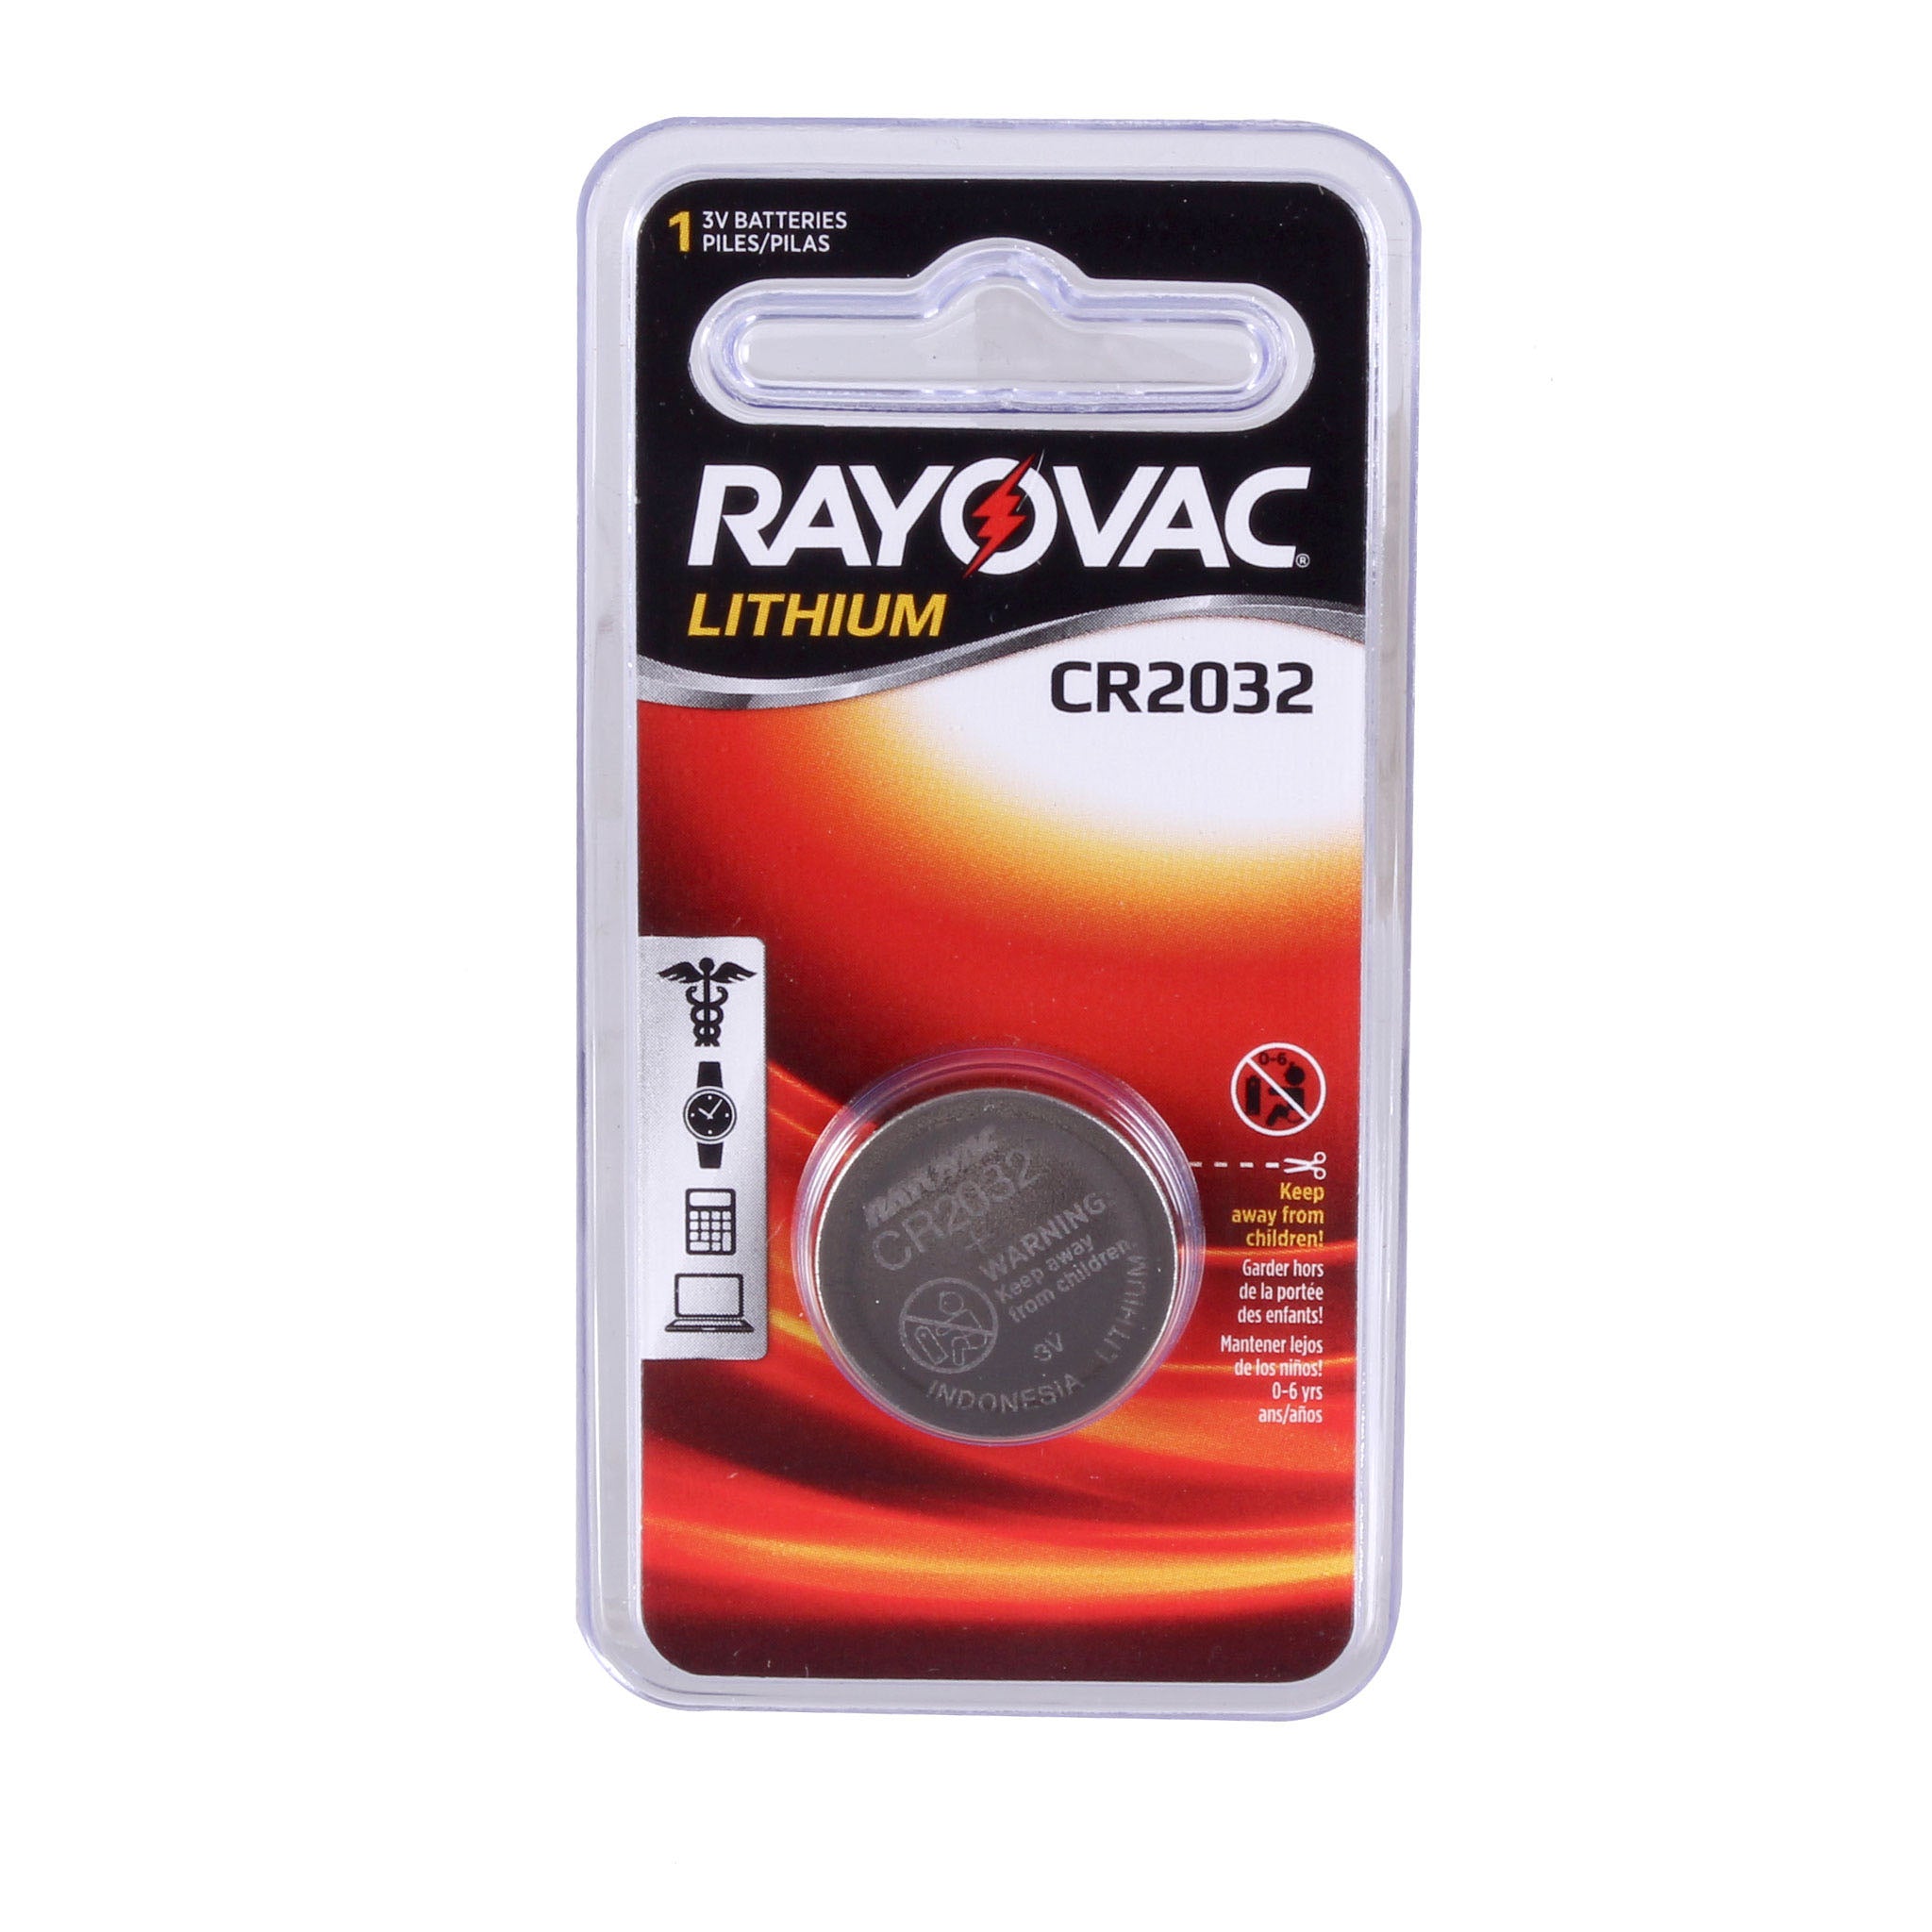 Loctite Rayovac 2032 Battery Each